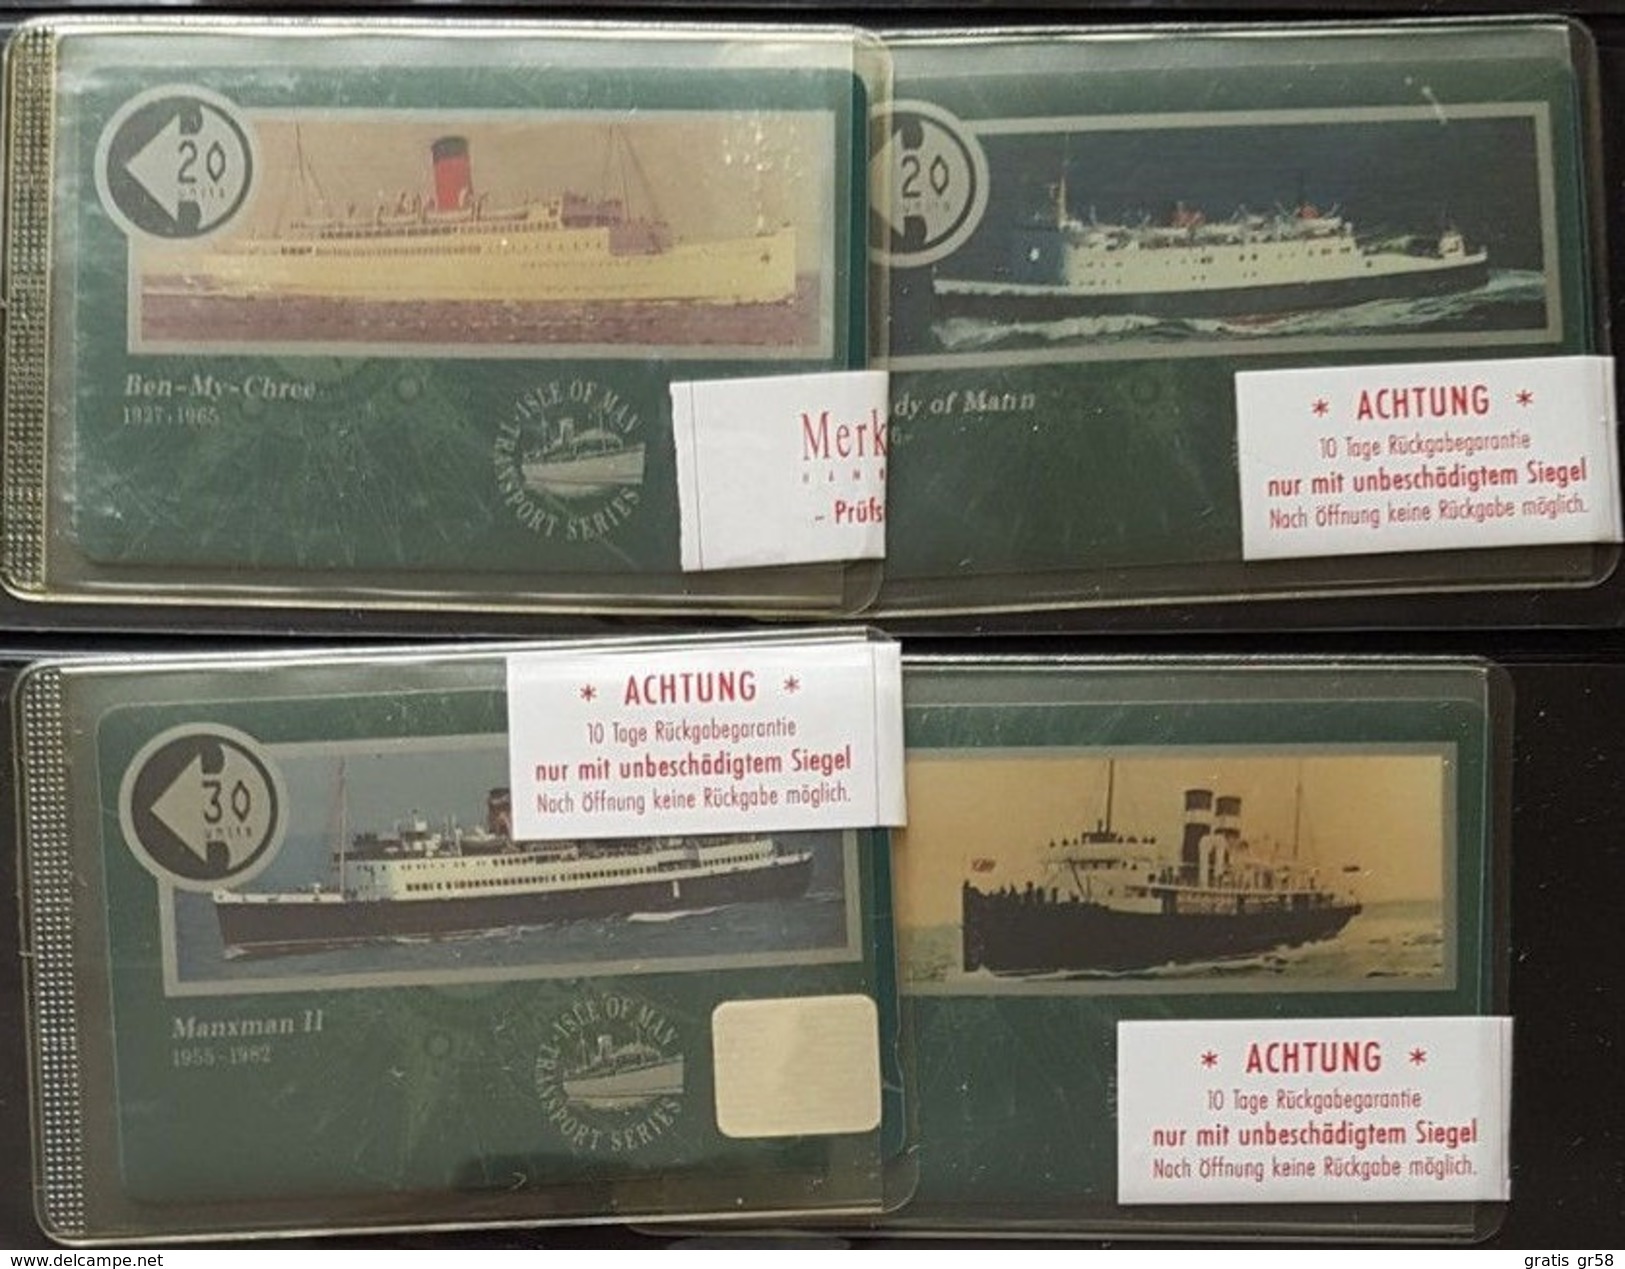 Isle Of Man - GPT, 10IOMA/B/C/D, Ships, Transport Series, Complete Set 4 Cards, 1991, Mint - Man (Isle Of)